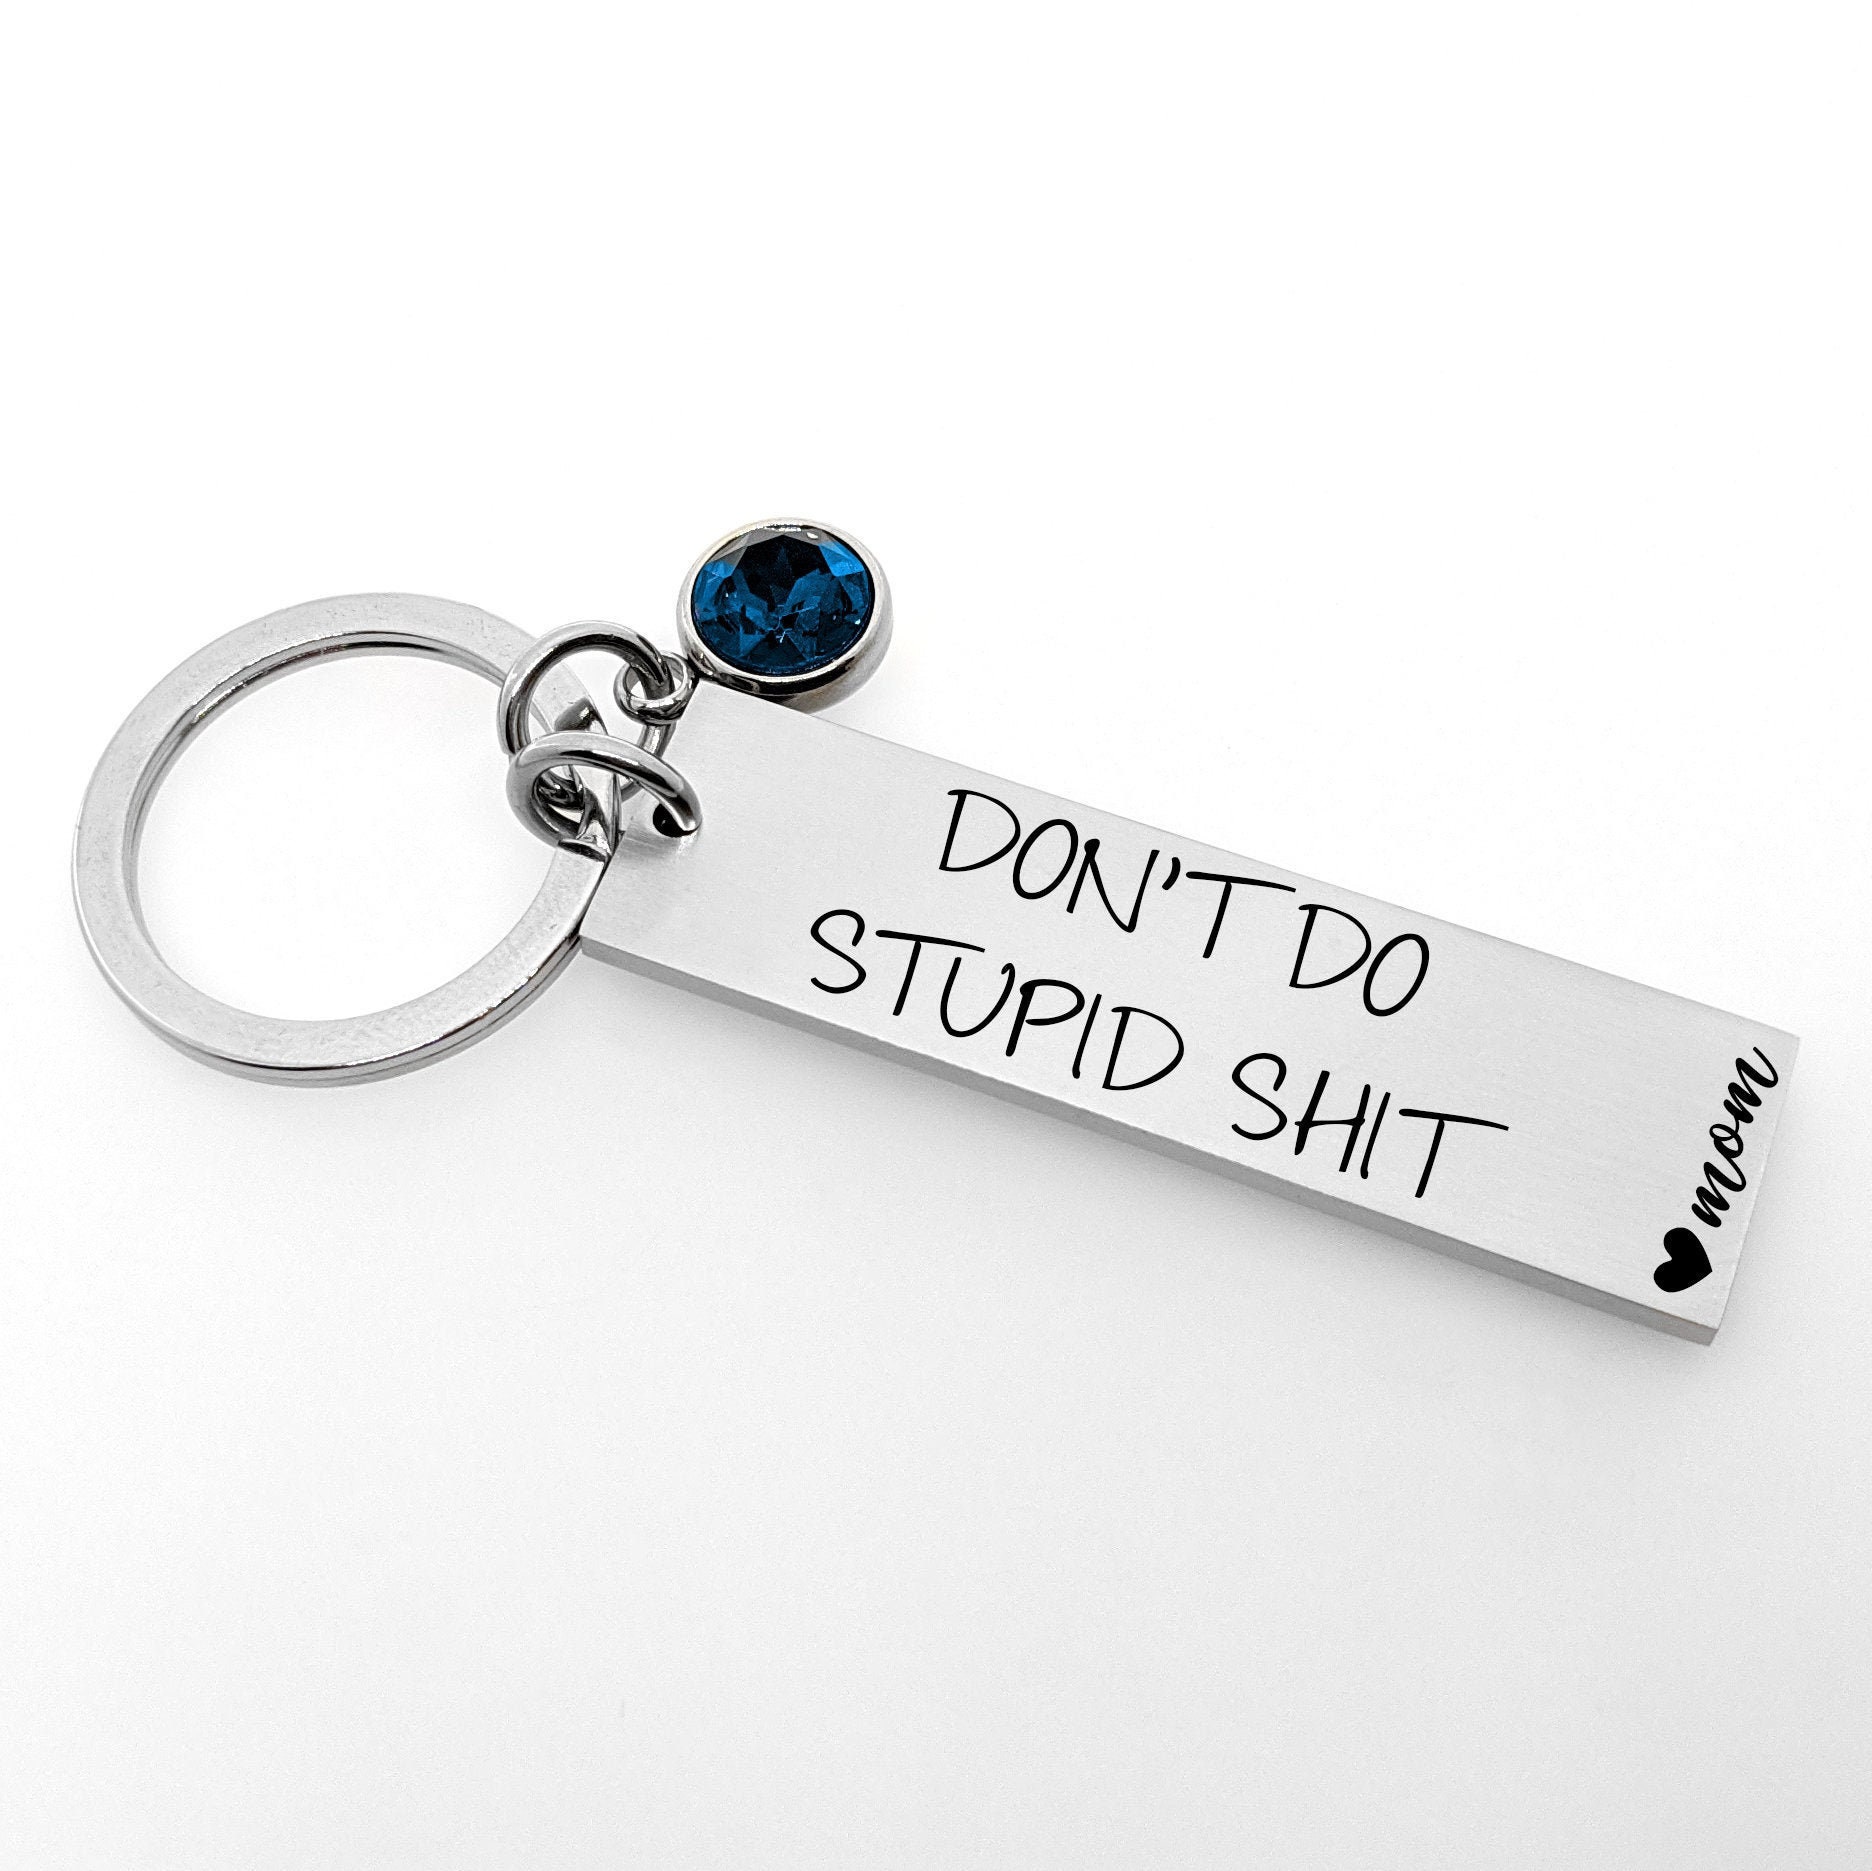 Don't Do Stupid Shit Funny Key Chain for Teenagers Gag Gift Gift